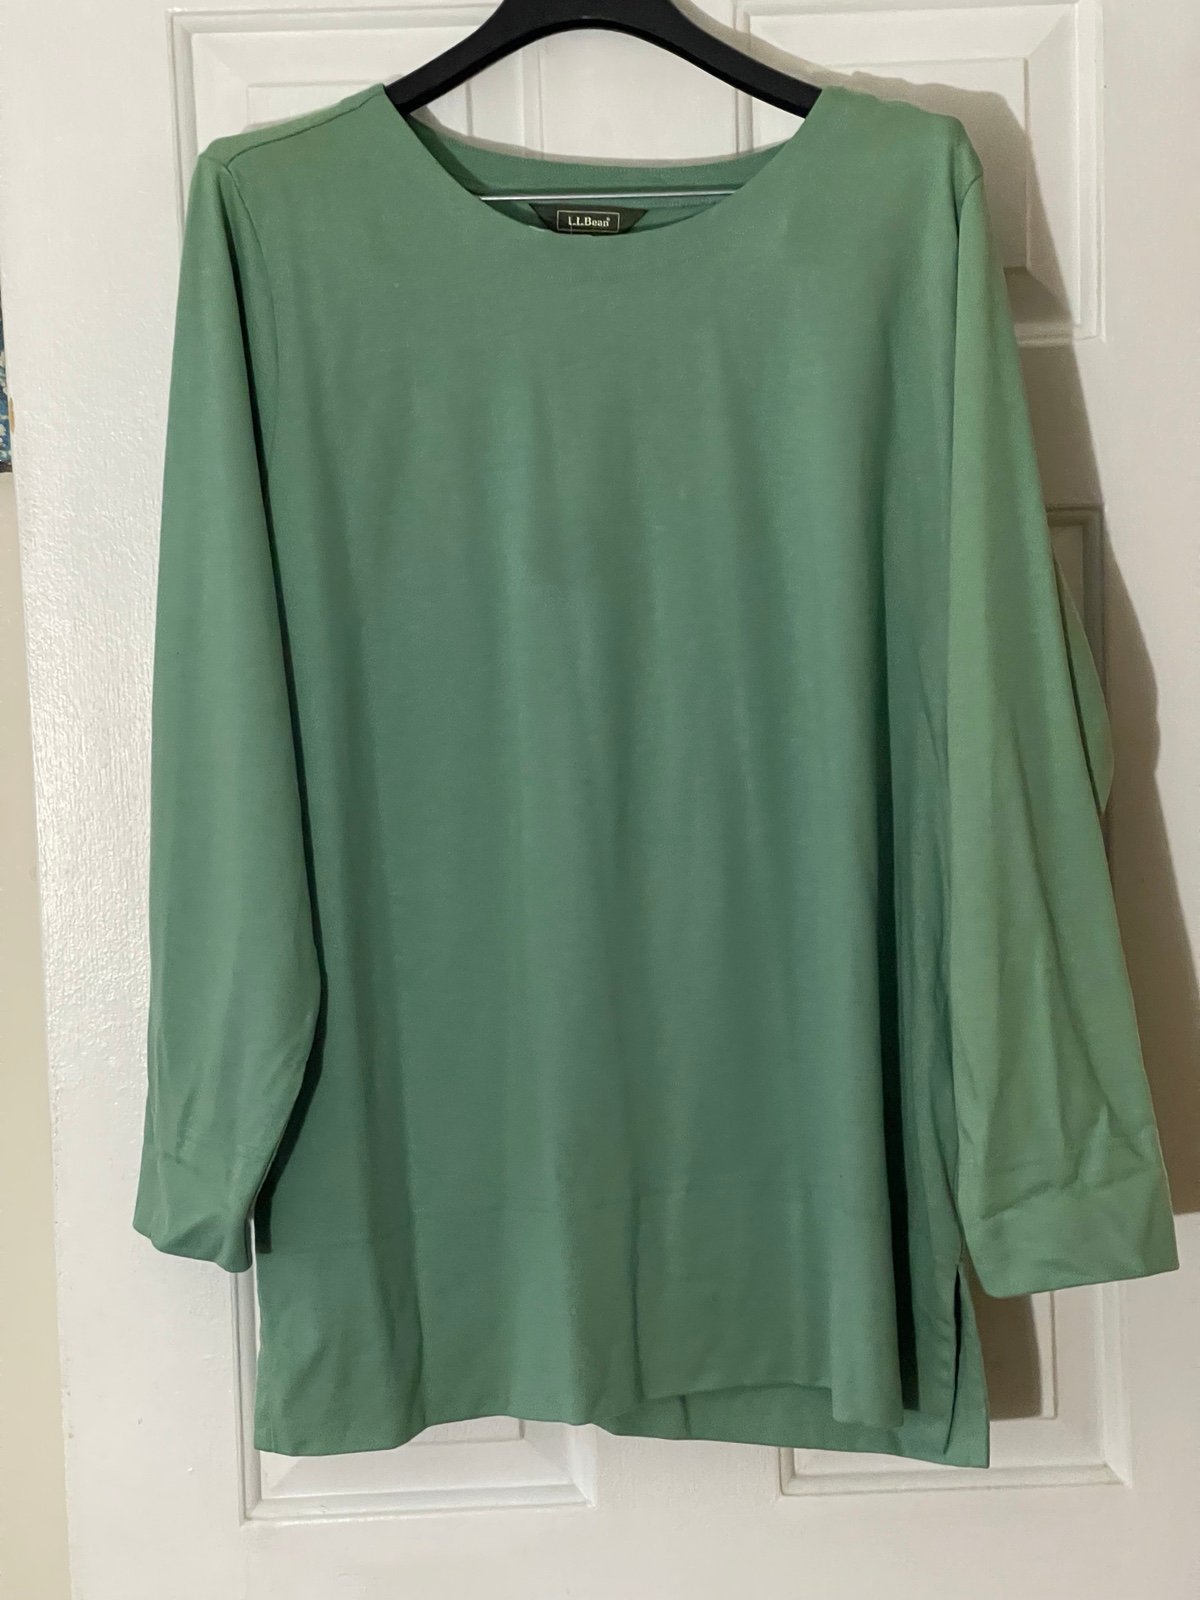 High quality L.L. Bean Woman’s Cotton Pullover New With